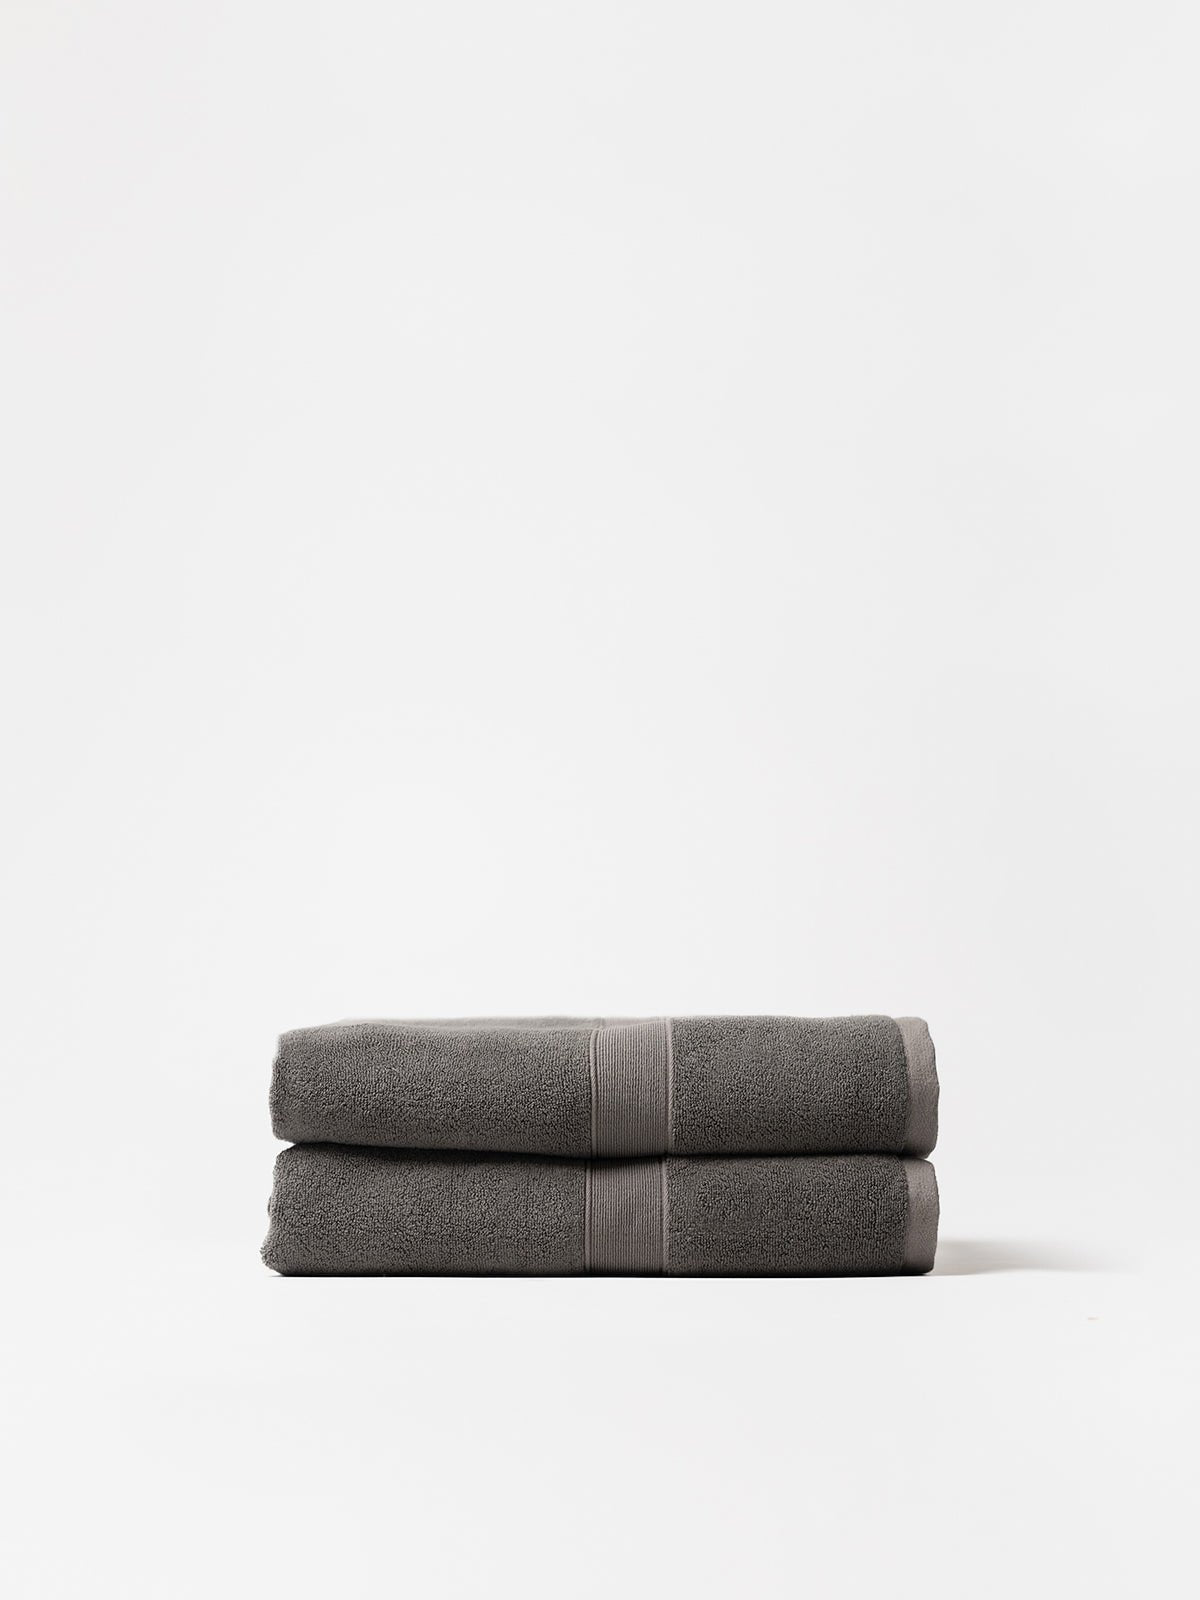 Two luxe bath sheets folded with white background |Color:Charcoal